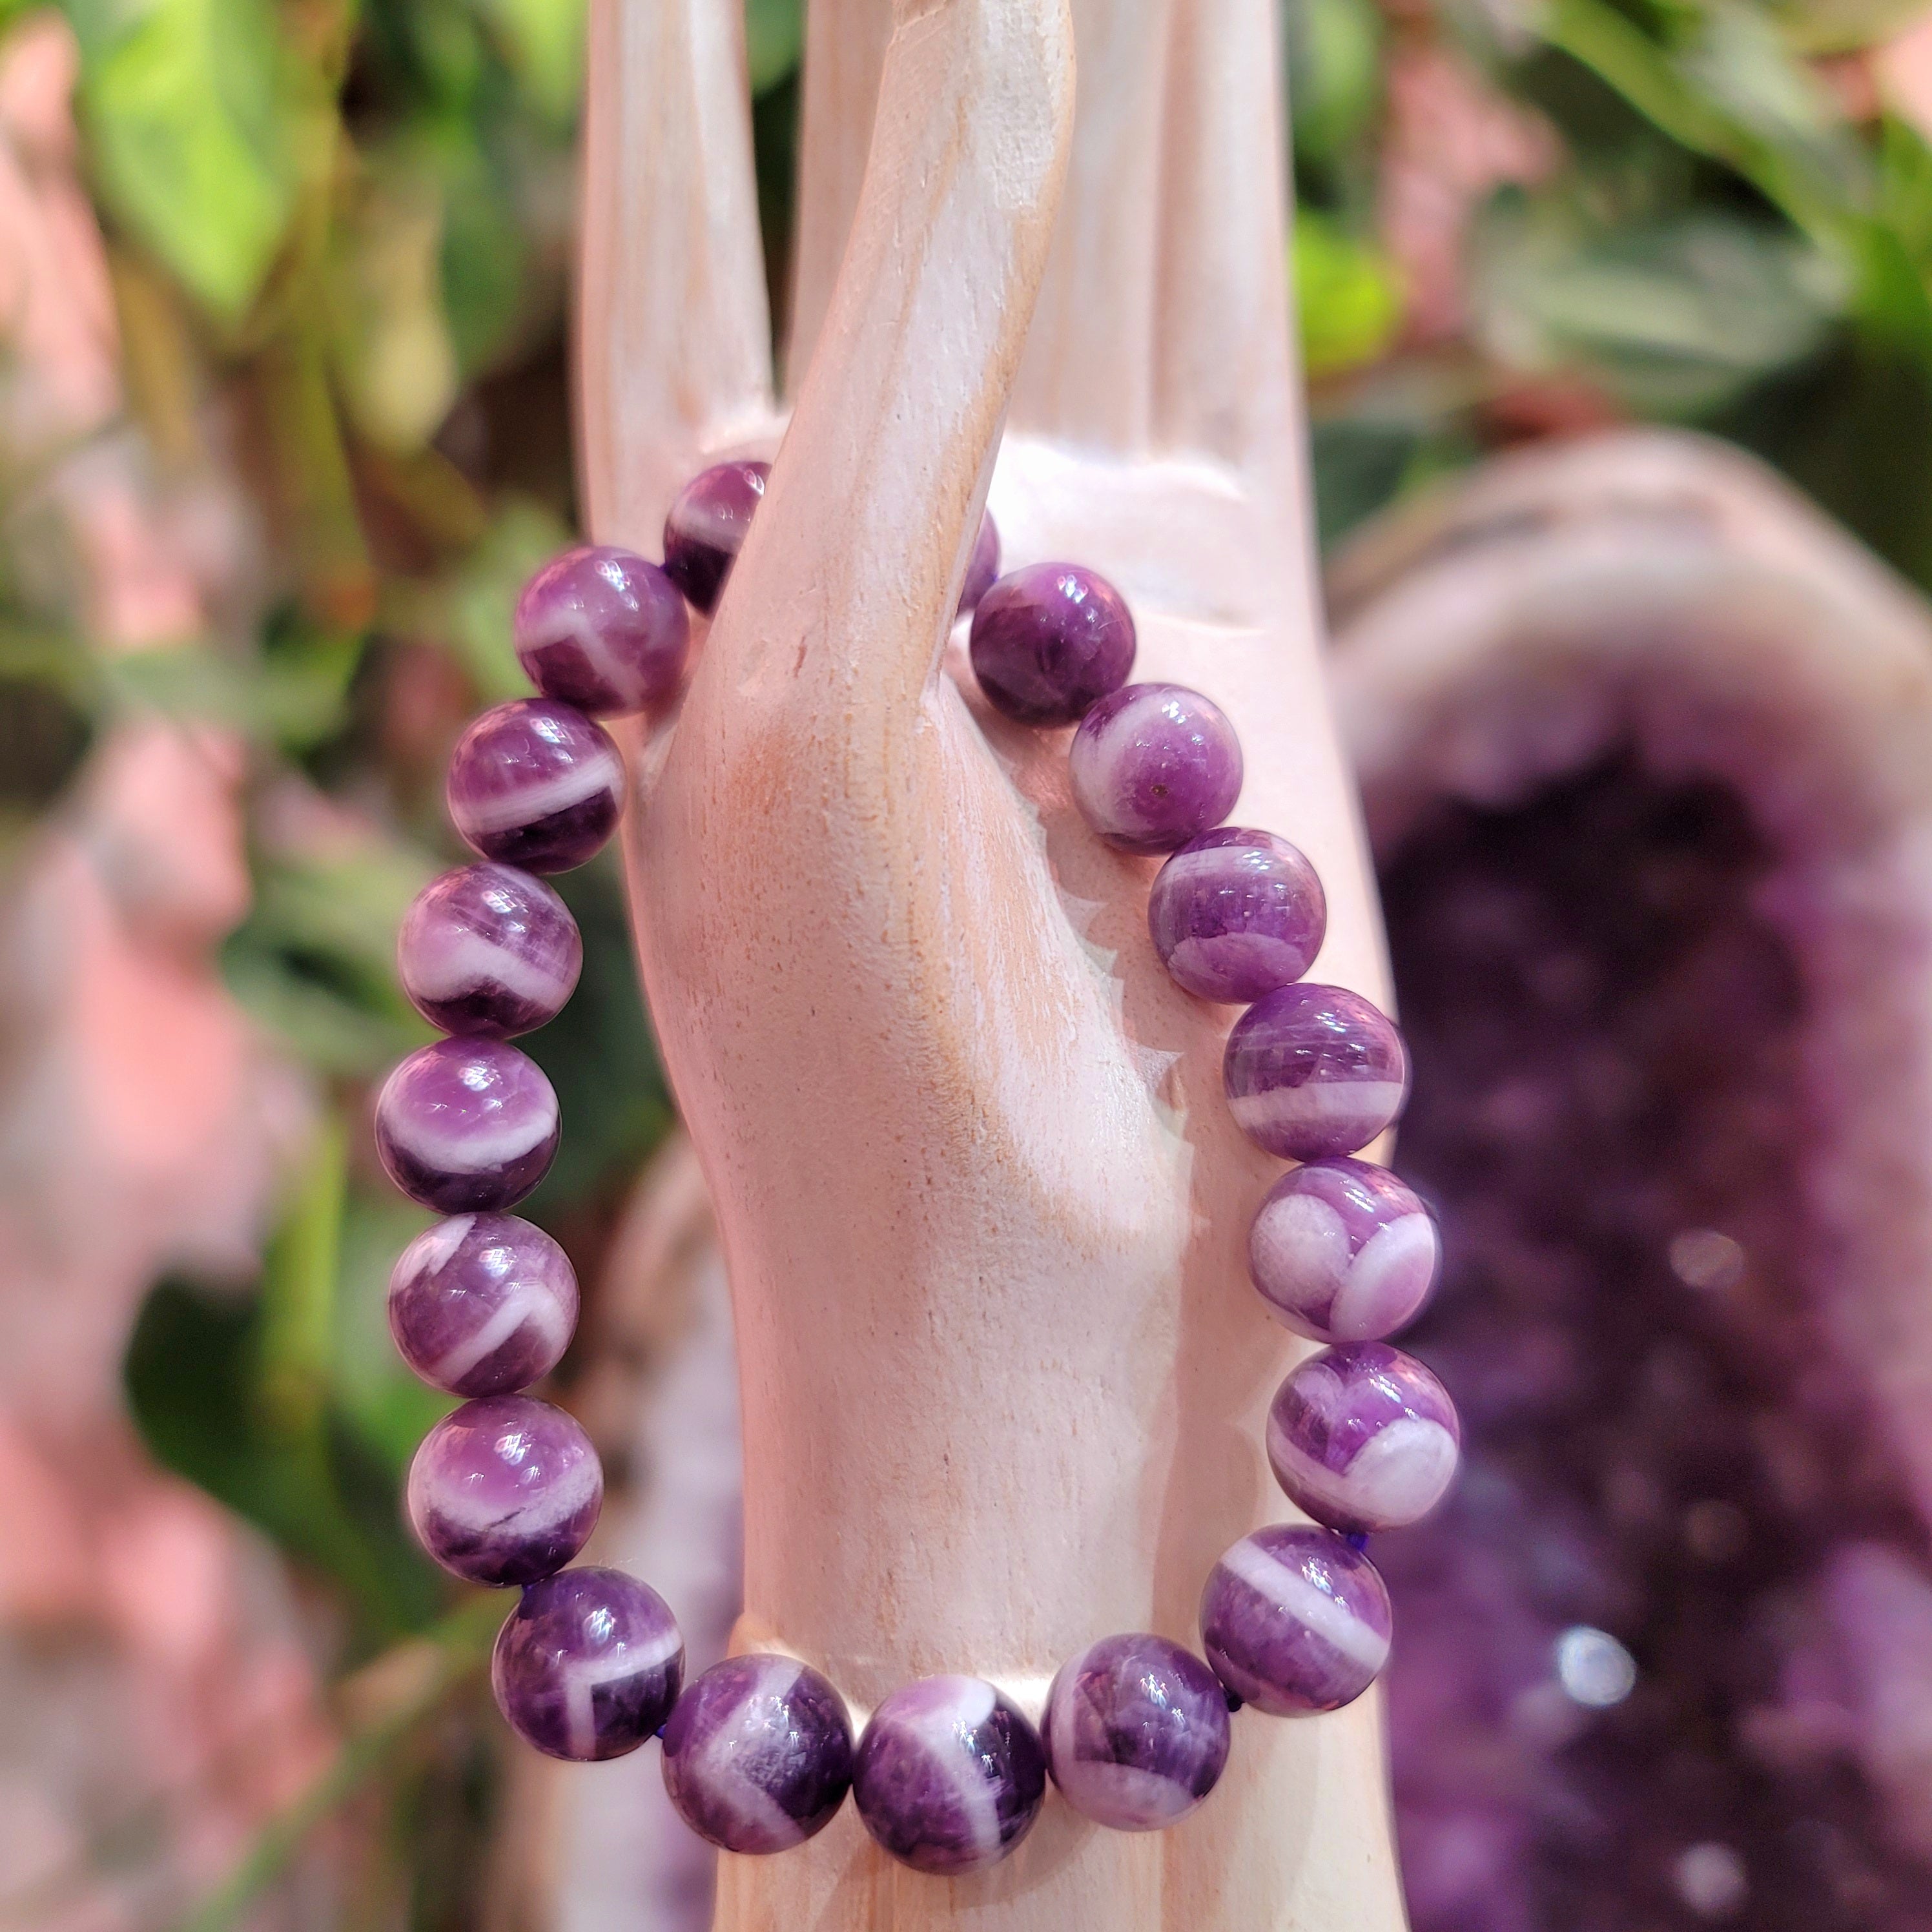 Chevron Amethyst Bracelet for Clarity, Intuition and Protection